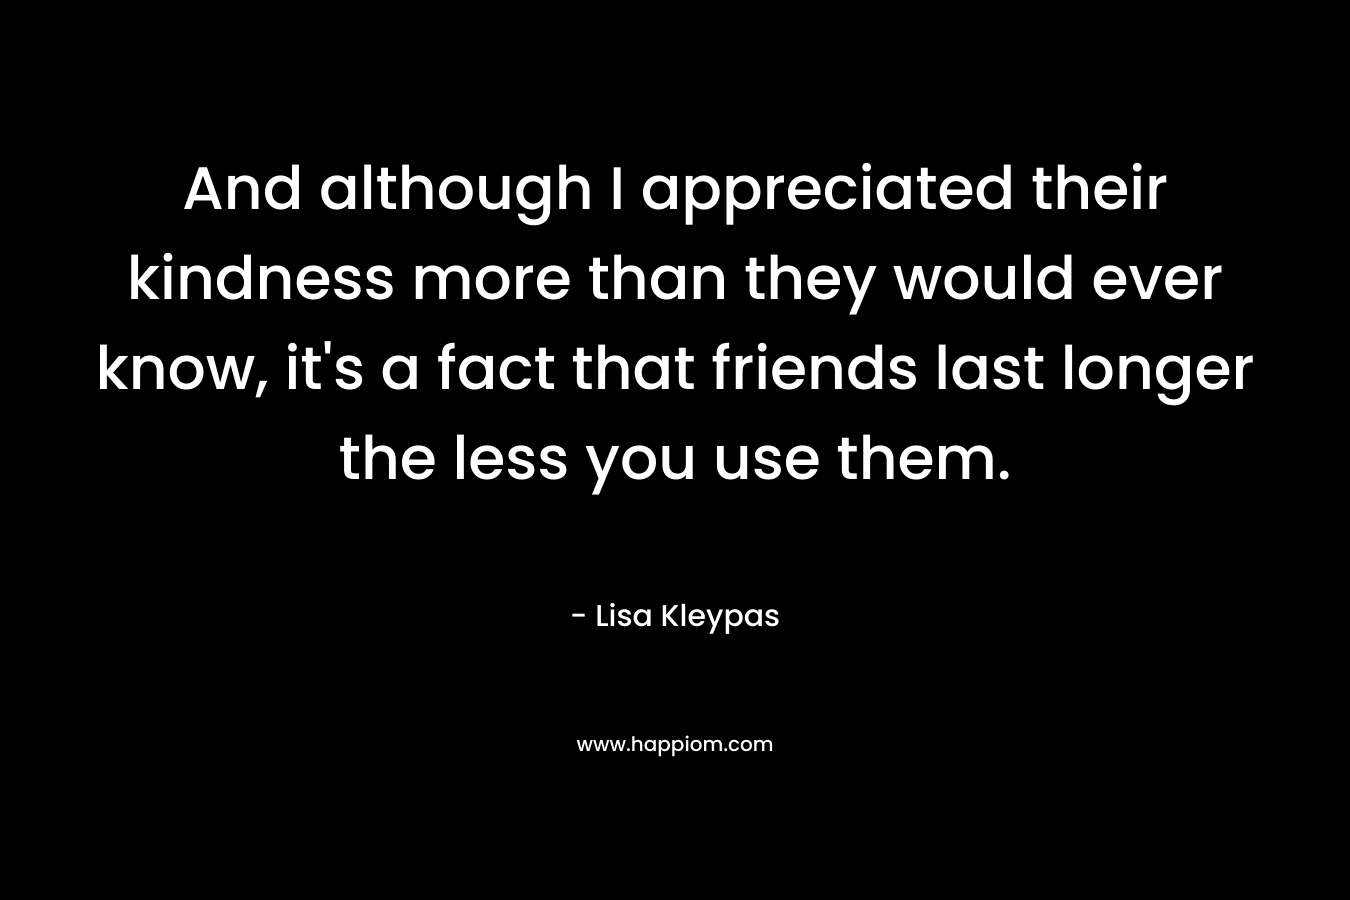 And although I appreciated their kindness more than they would ever know, it's a fact that friends last longer the less you use them.